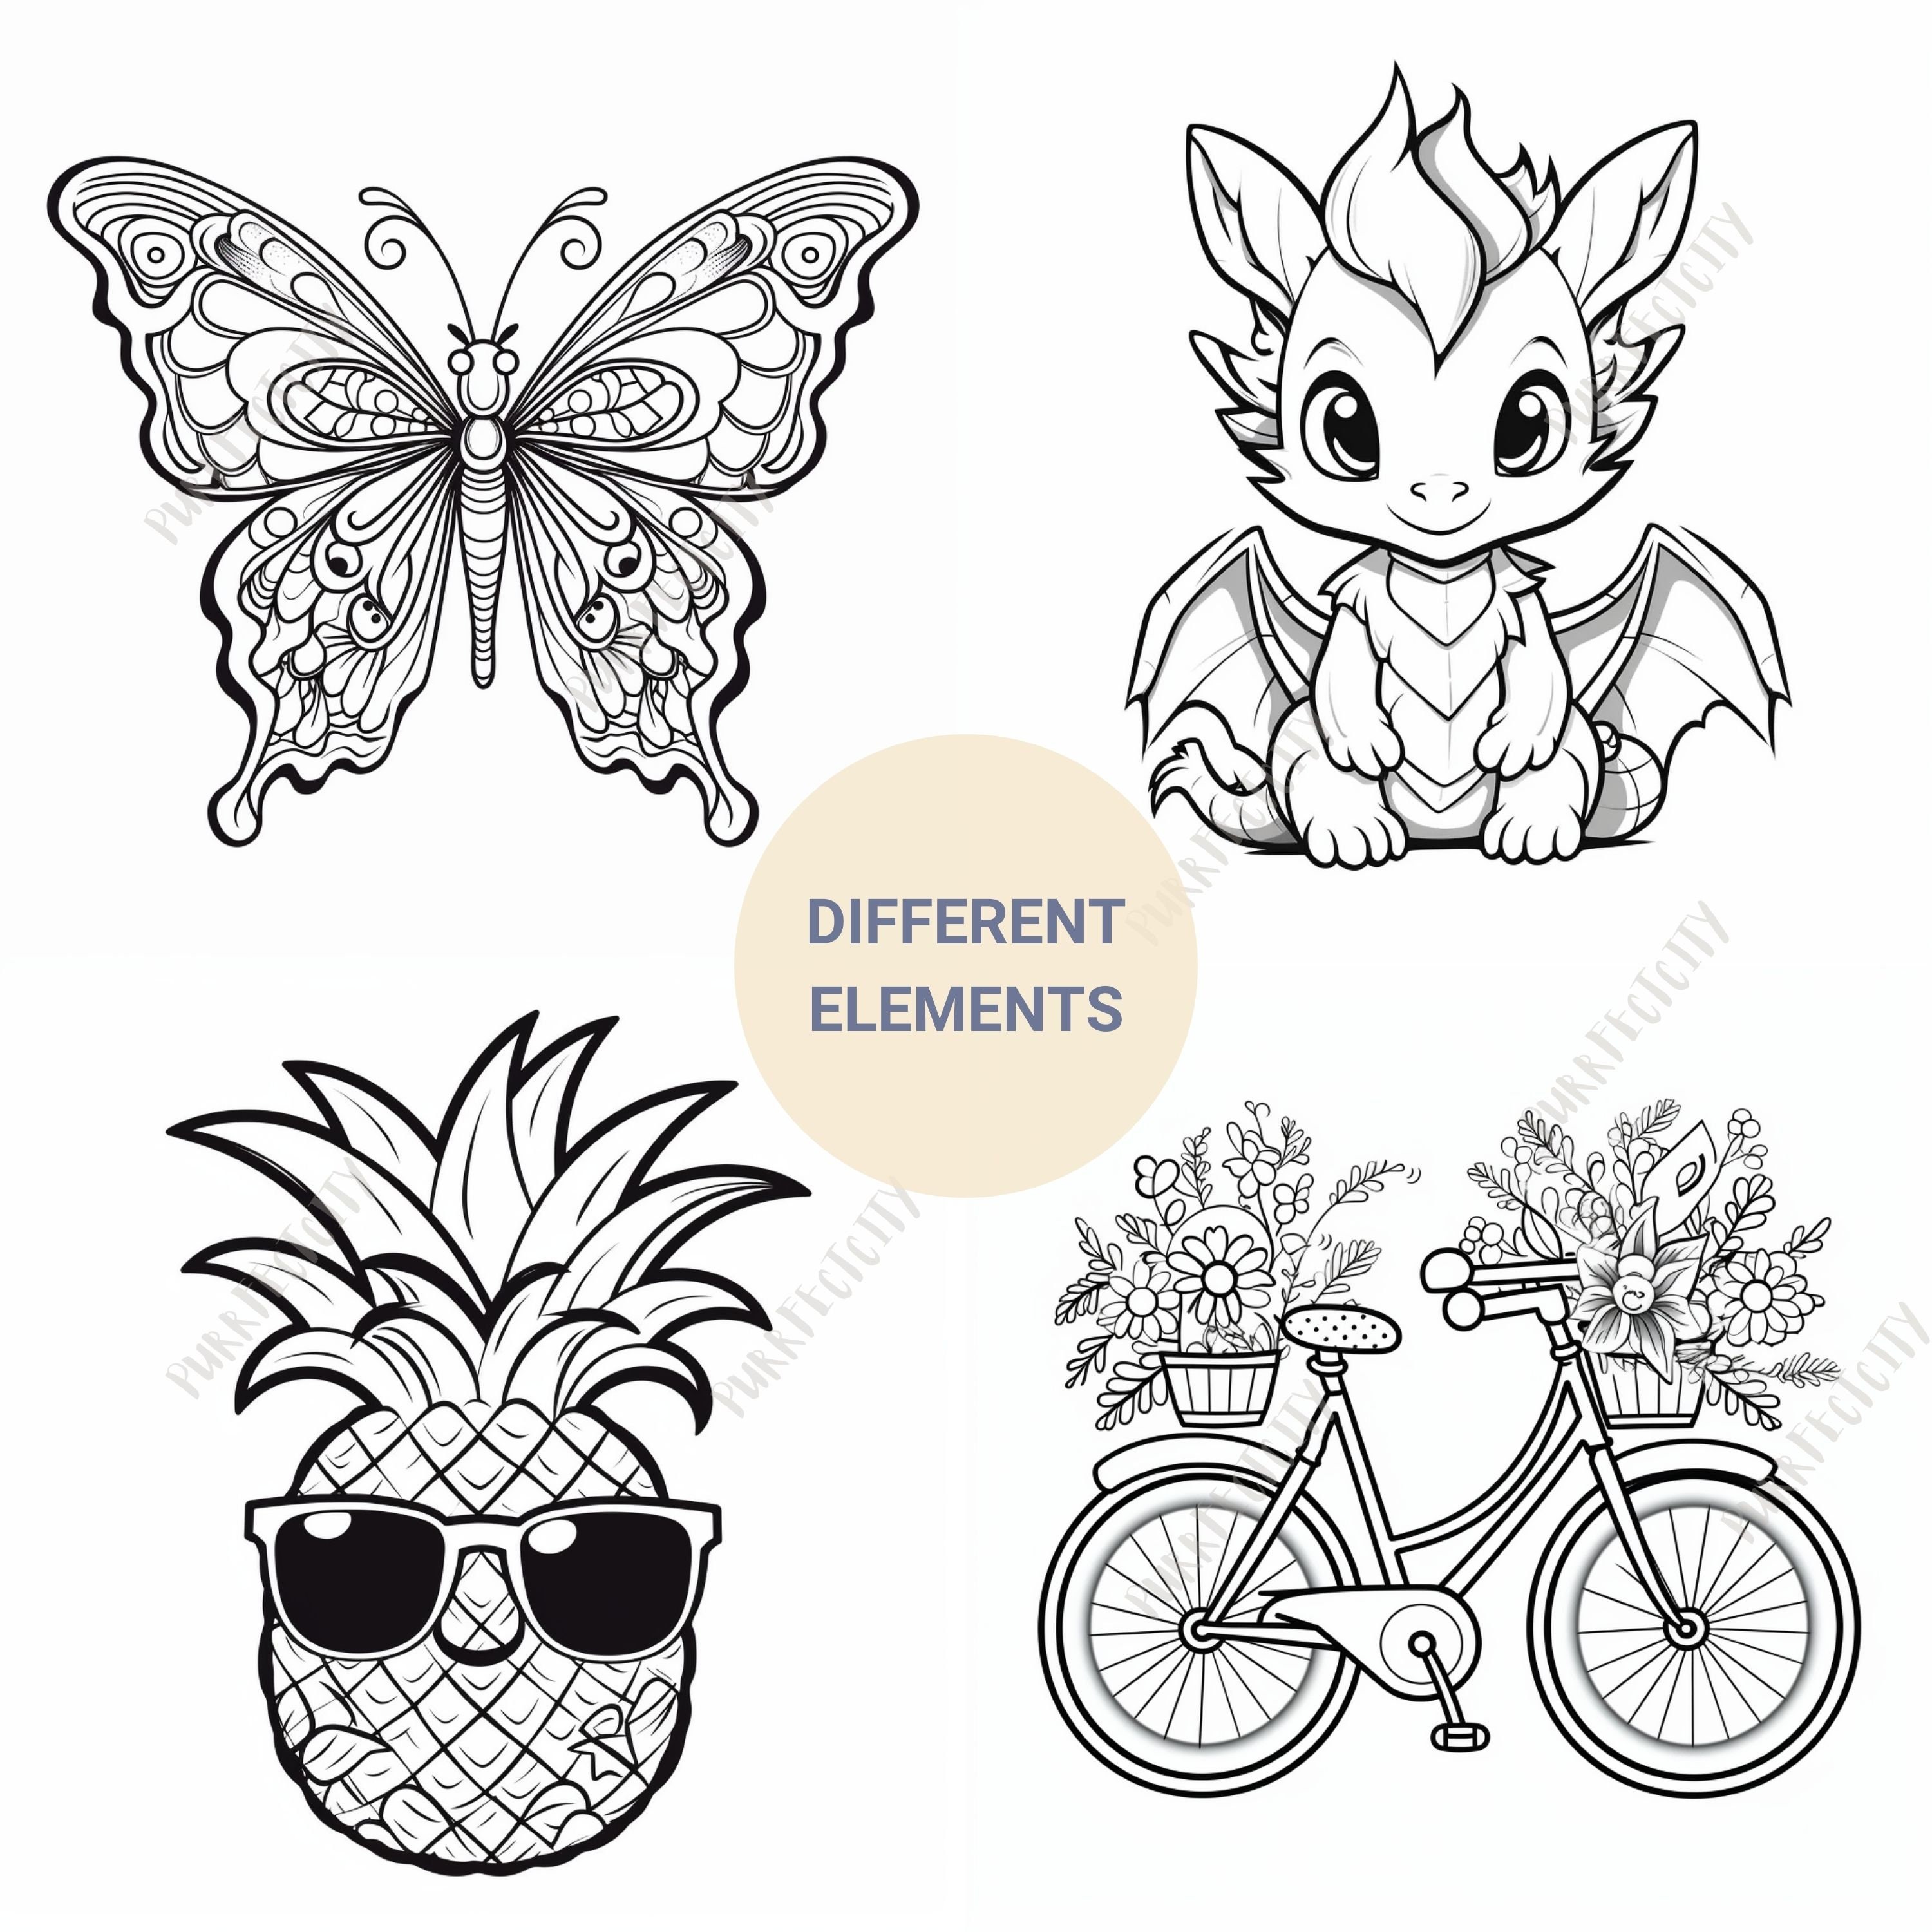 Cute coloring pages, kinda : r/midjourney